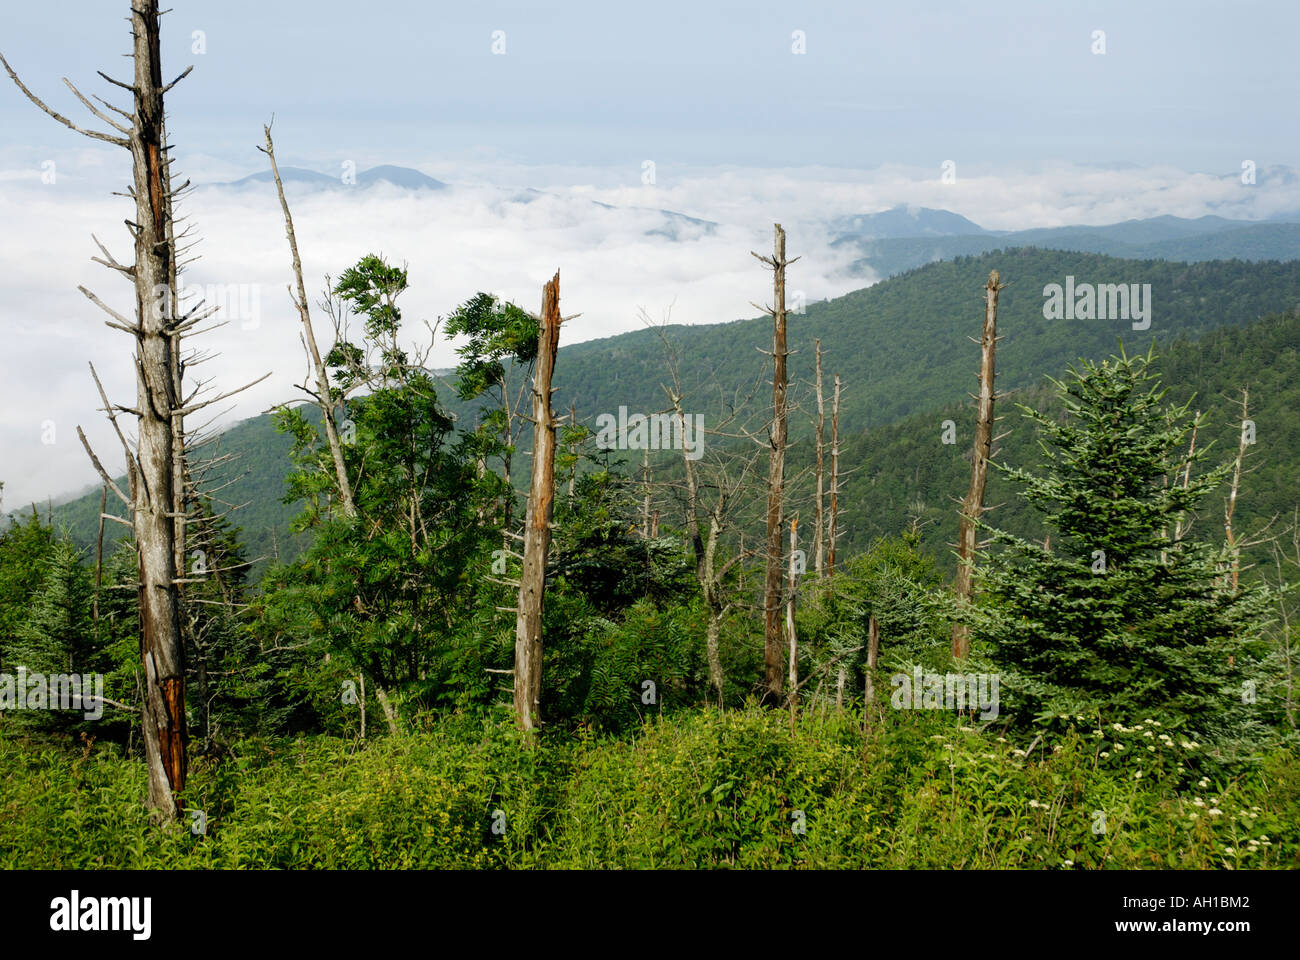 Dead Fraser Fir, Abies fraseri, trees - victims of Balsam Wooly Adelgid, Clingman's Dome, Great Smoky Mountains National Park Stock Photo